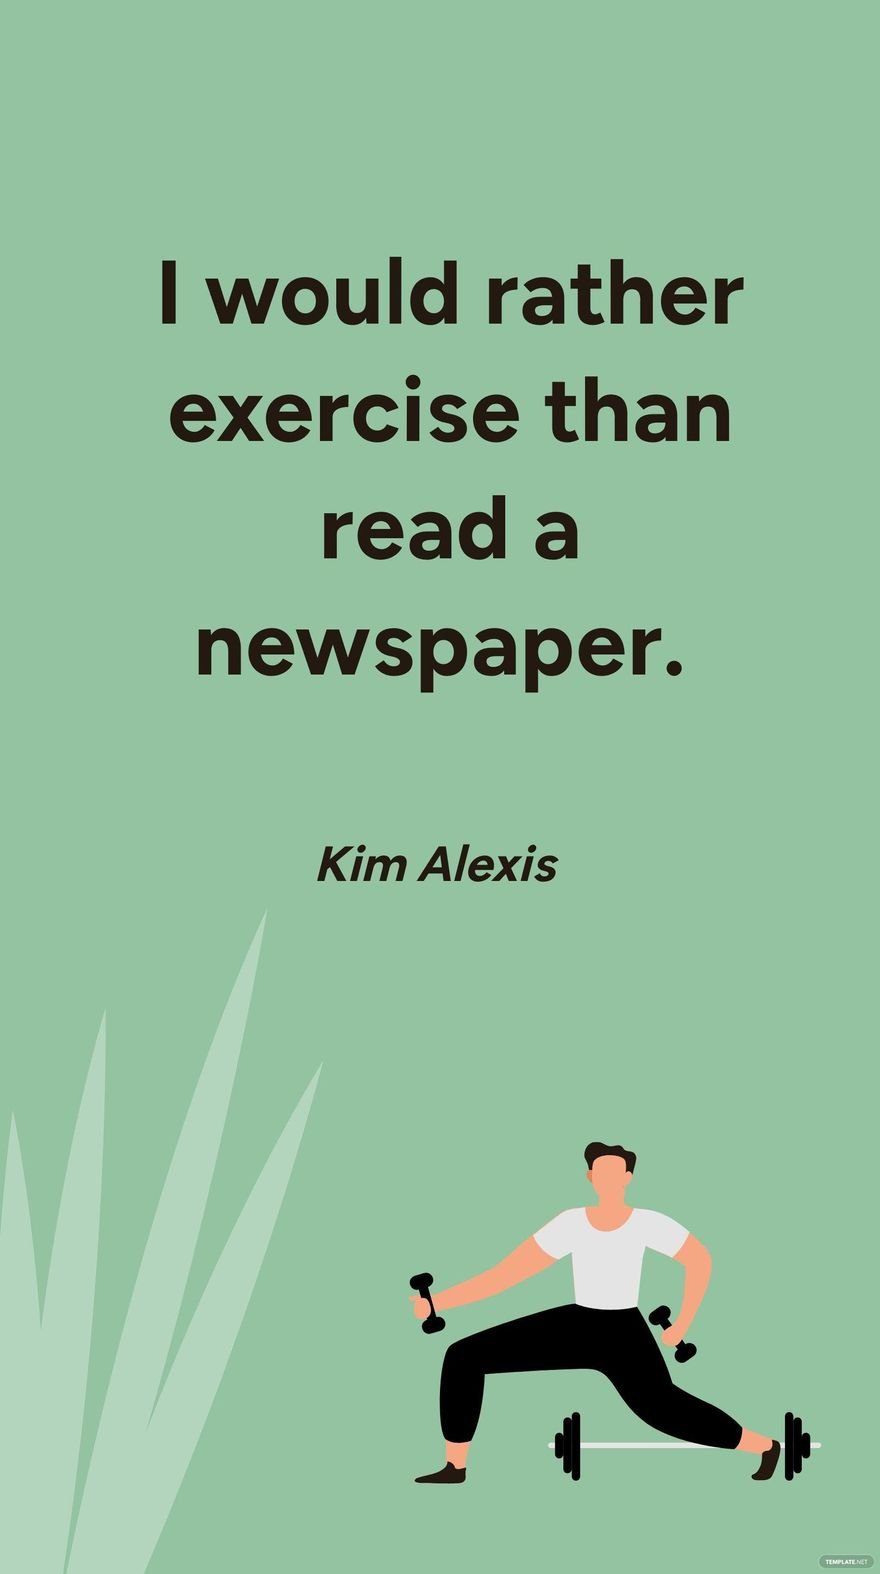 Free Kim Alexis - I would rather exercise than read a newspaper.